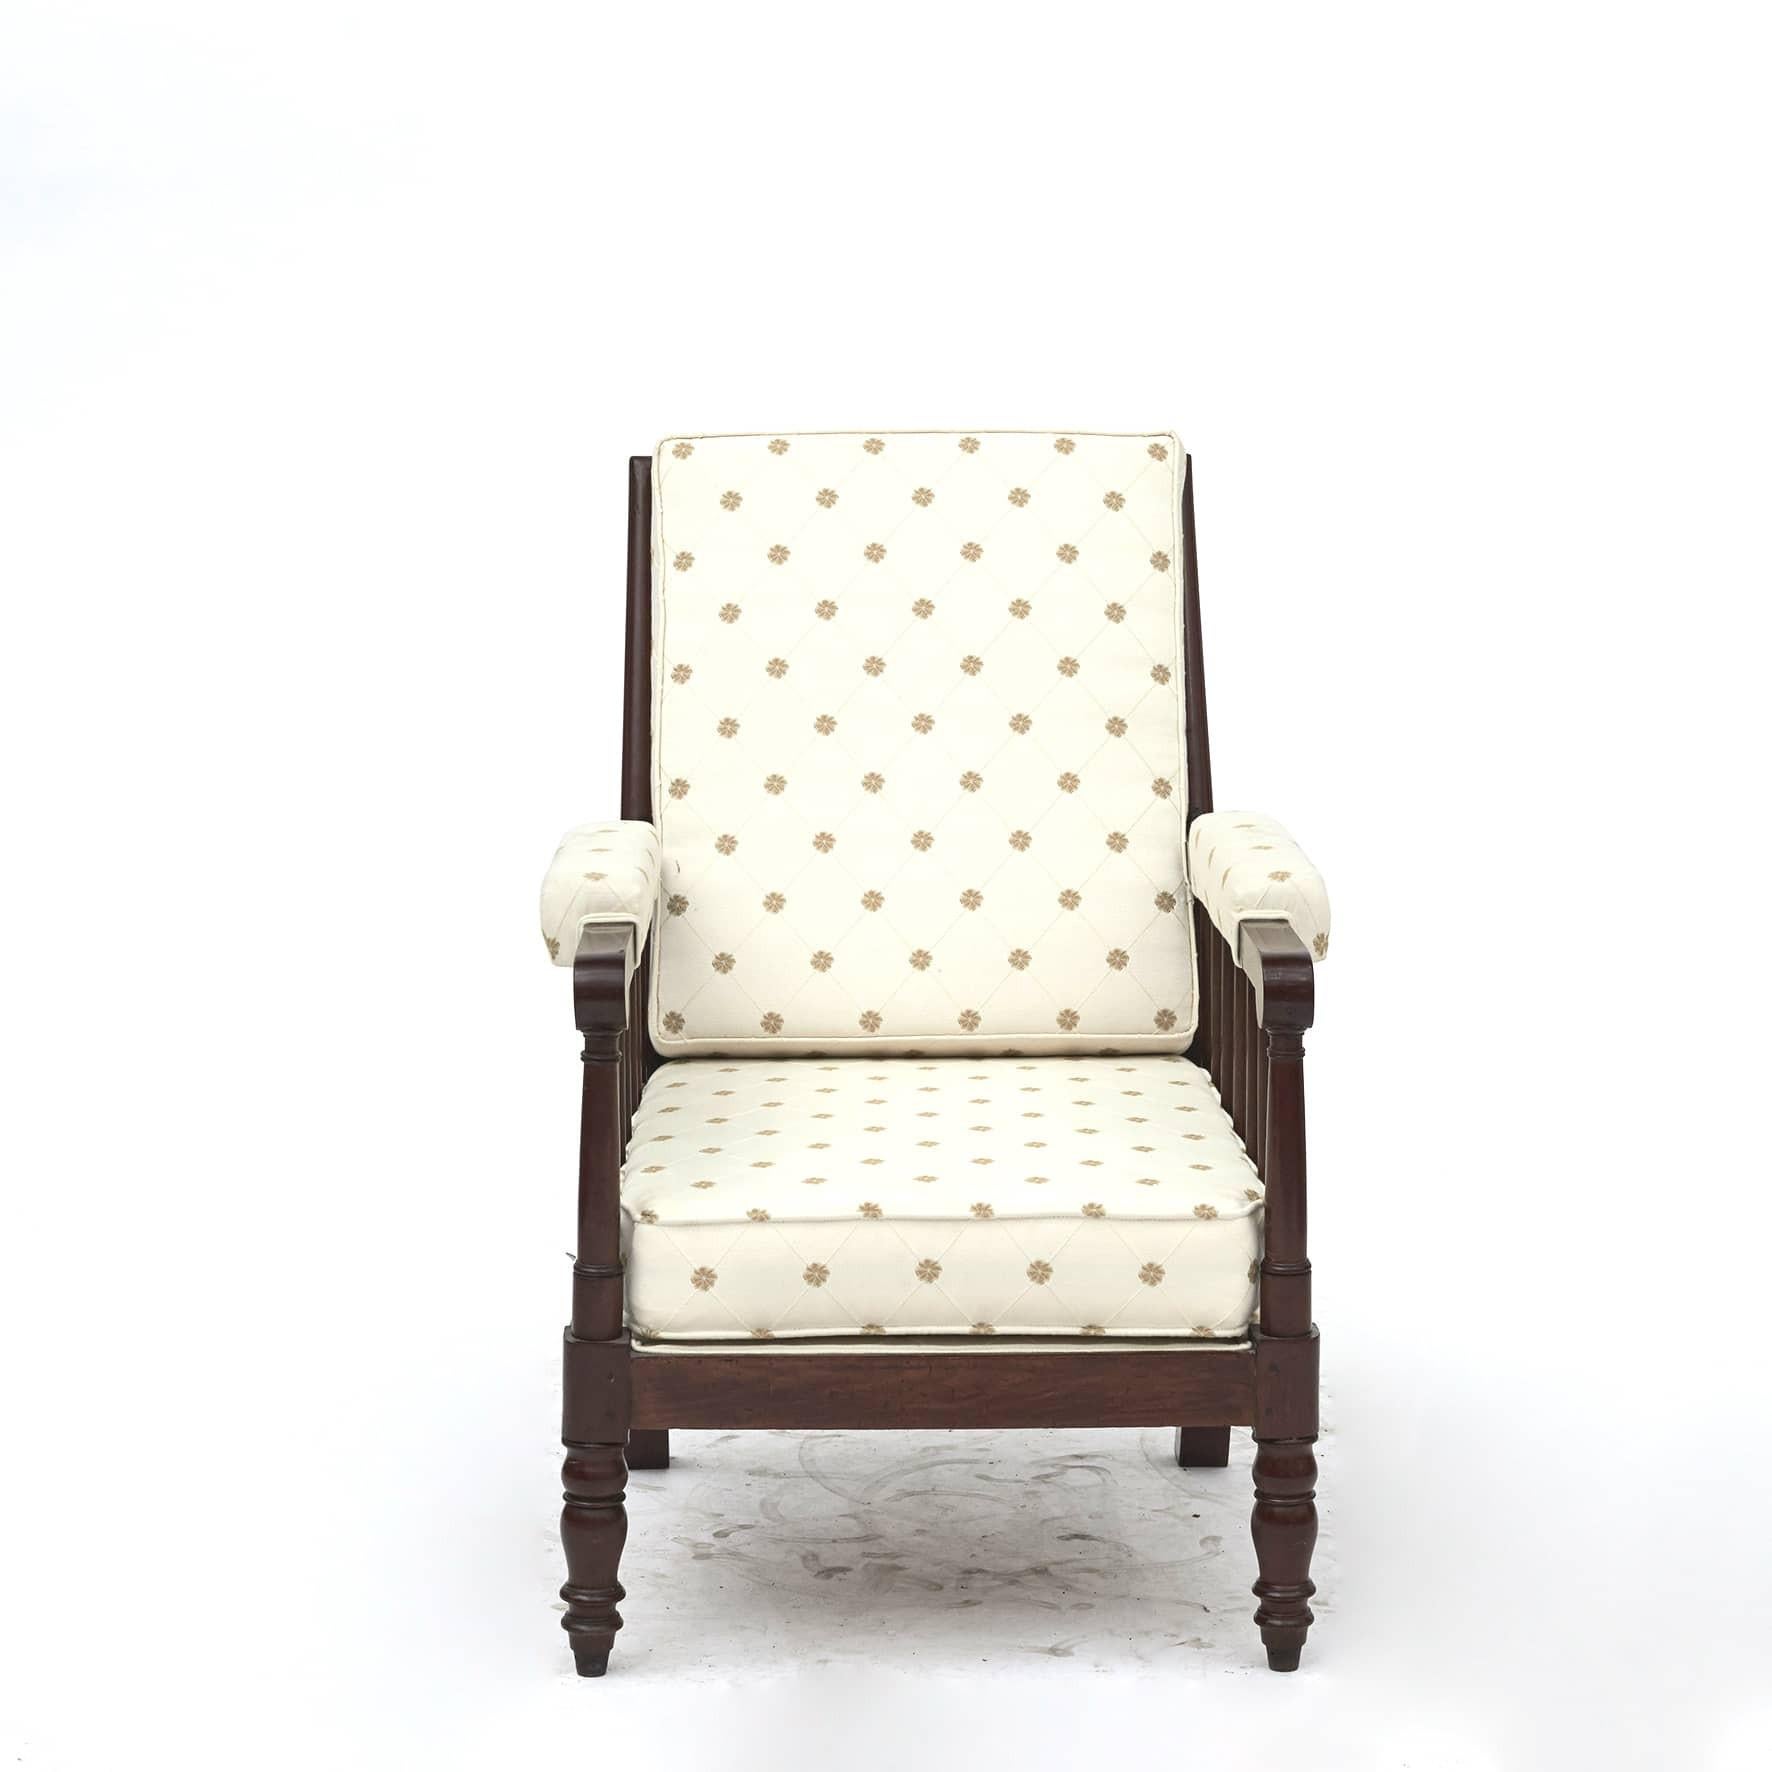 19th Century Regency Mahogany Armchair, England Approx. 1810 - 1820 For Sale